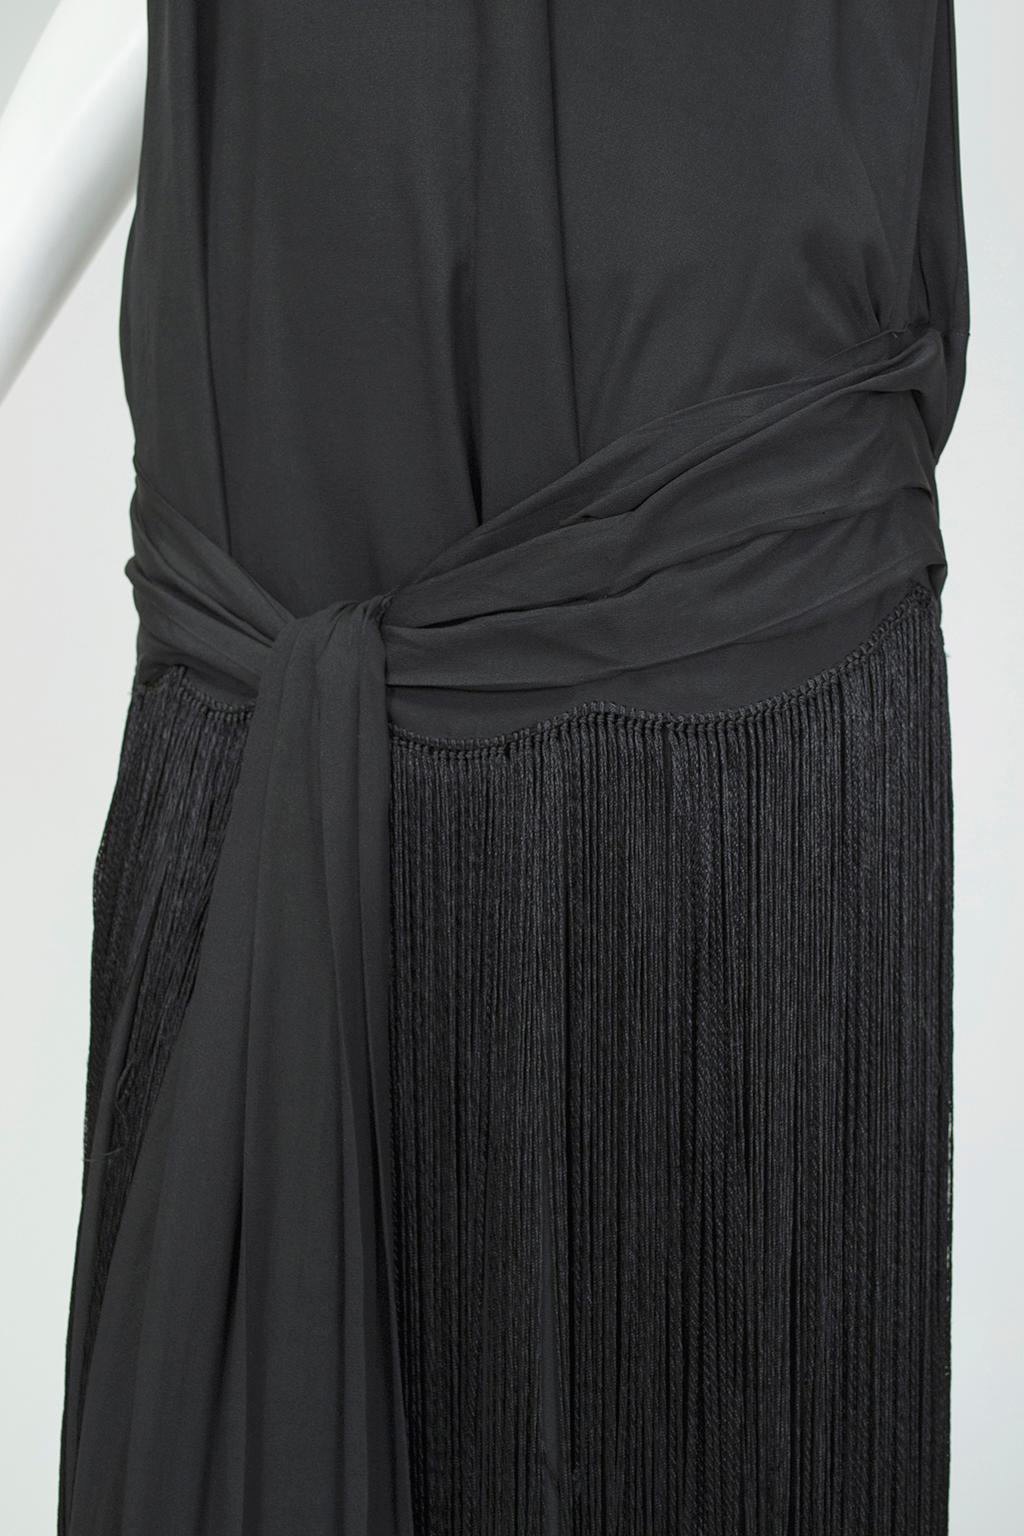 Women's Black *Large Size* Jazz Baby Backless Fringed Wrapping Flapper Dress- M-L, 1920s For Sale